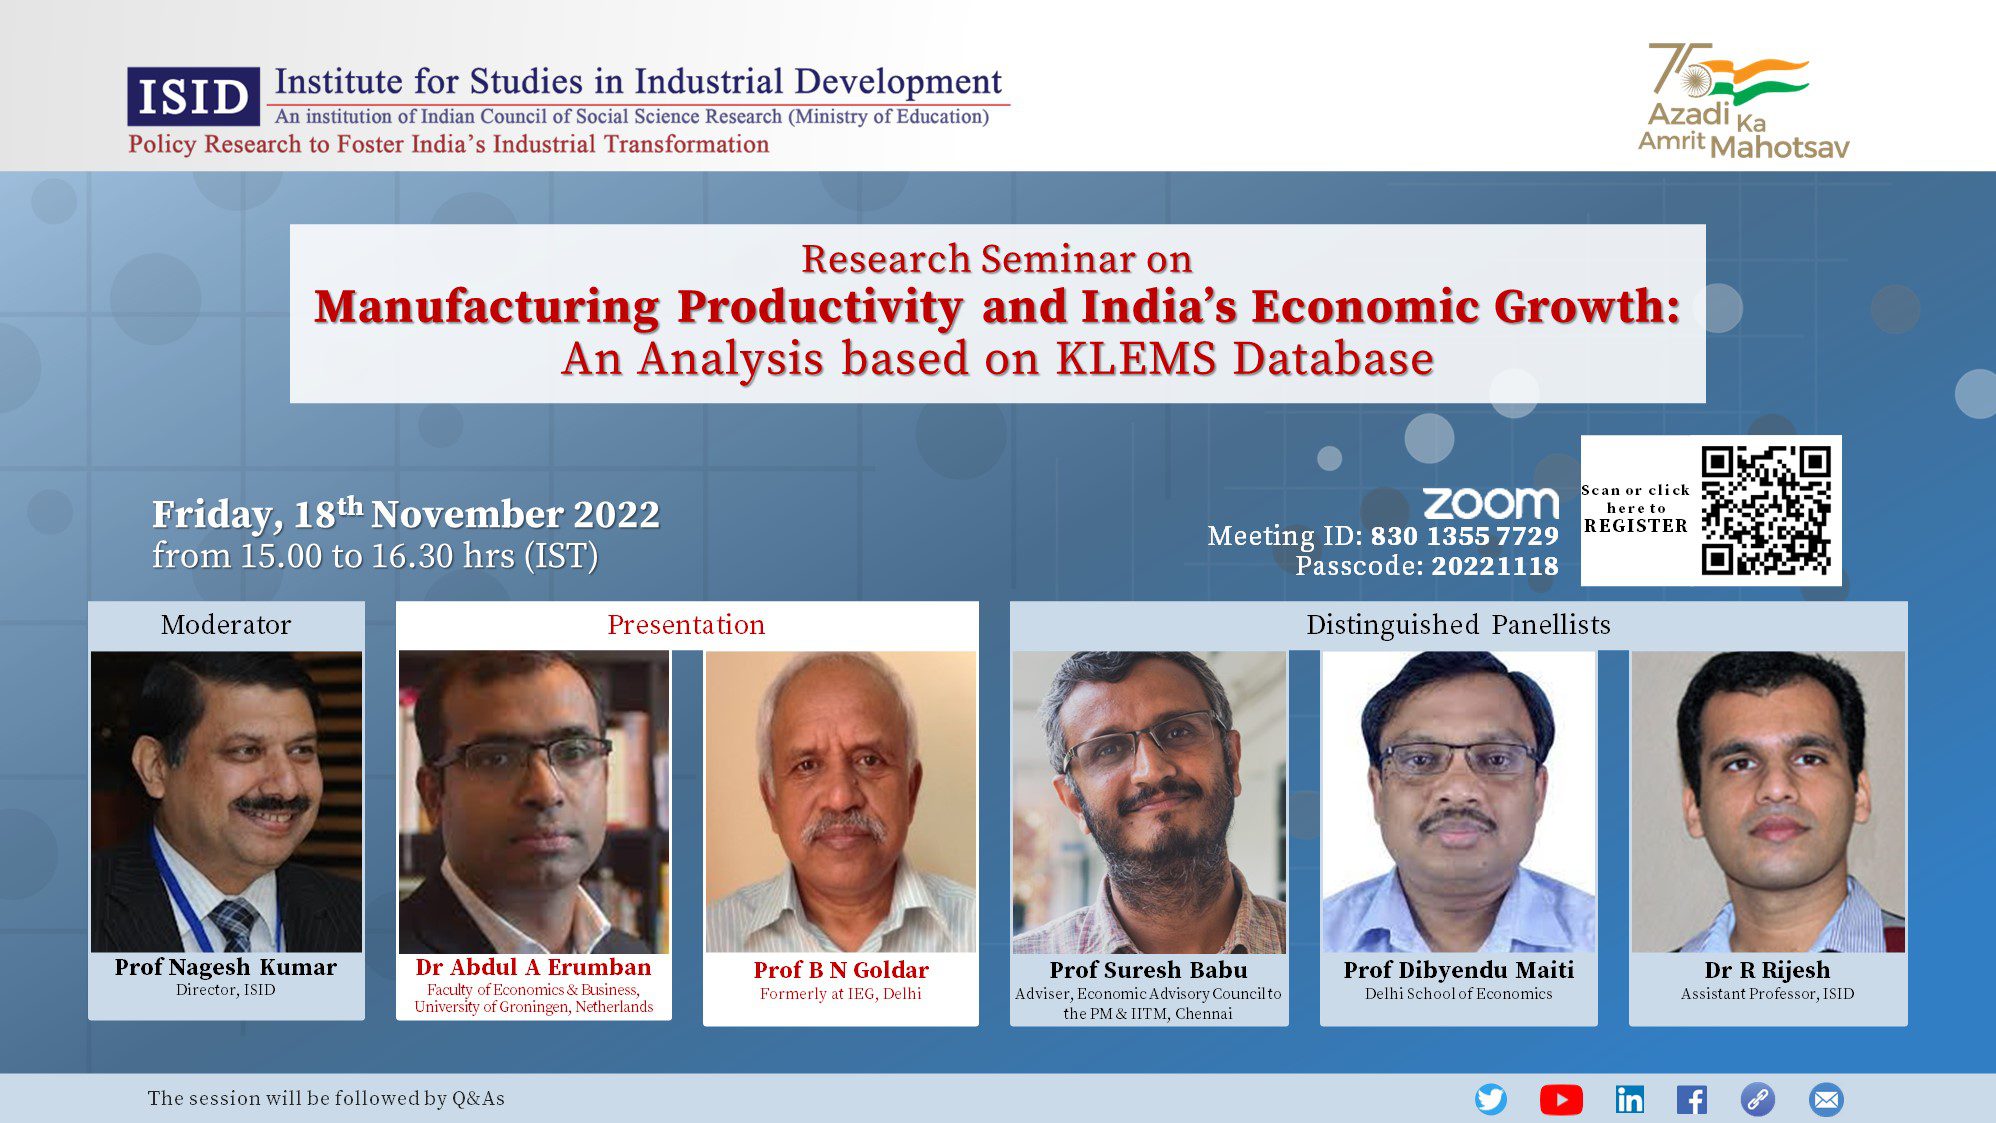 Research Seminar on Manufacturing Productivity and India’s Economic Growth: An Analysis based on KLEMS Database